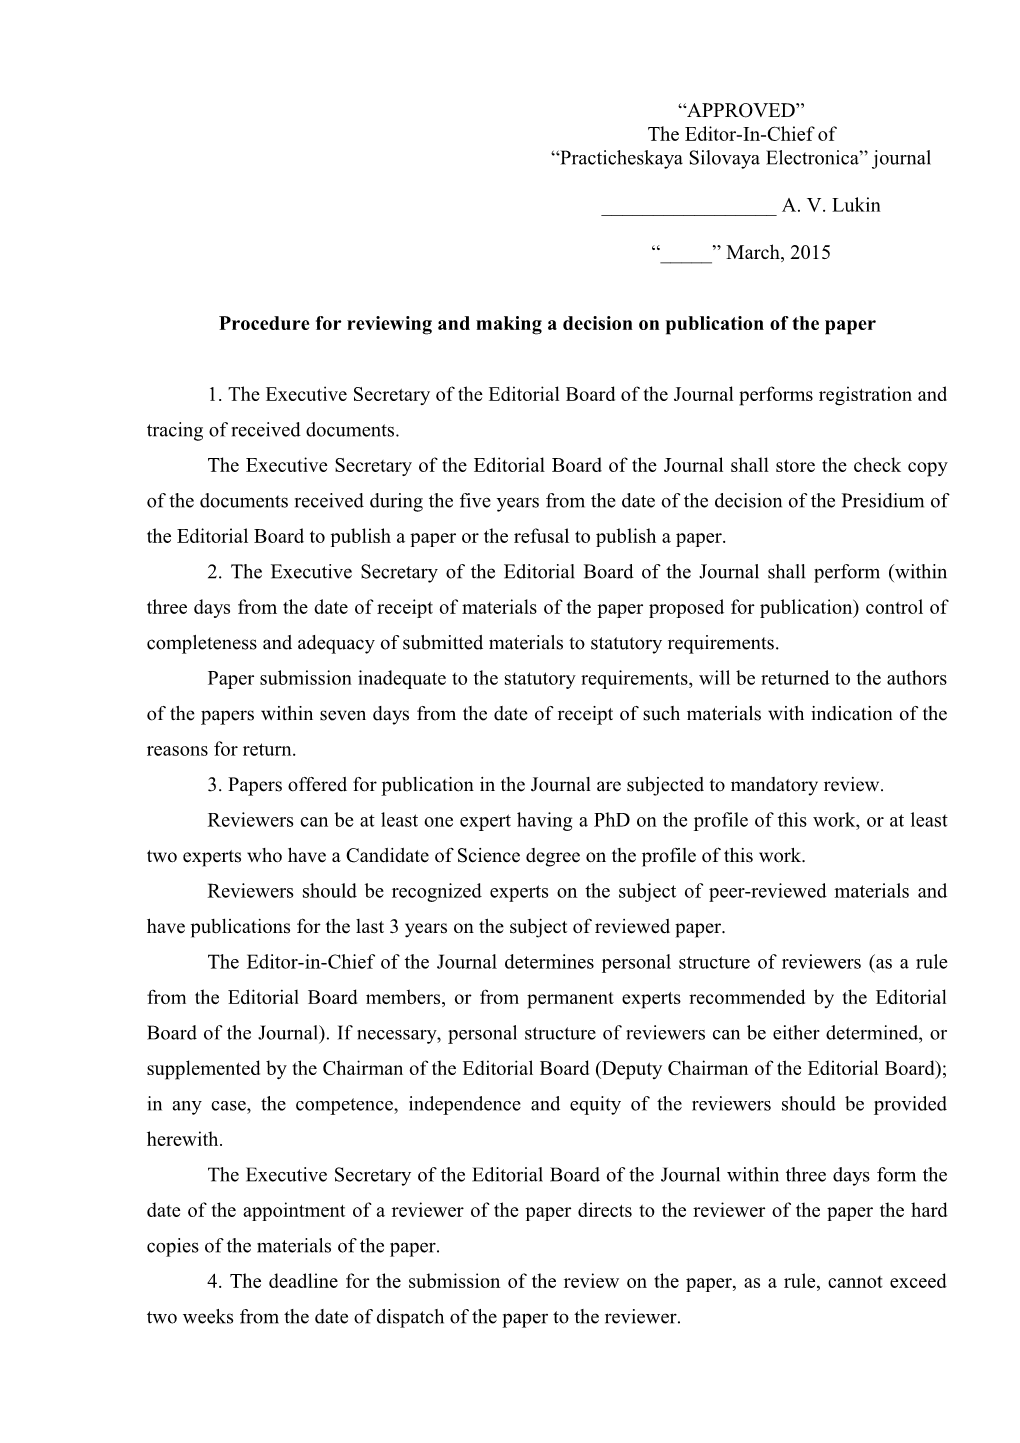 Procedure for Reviewing and Making a Decision on Publication of the Paper